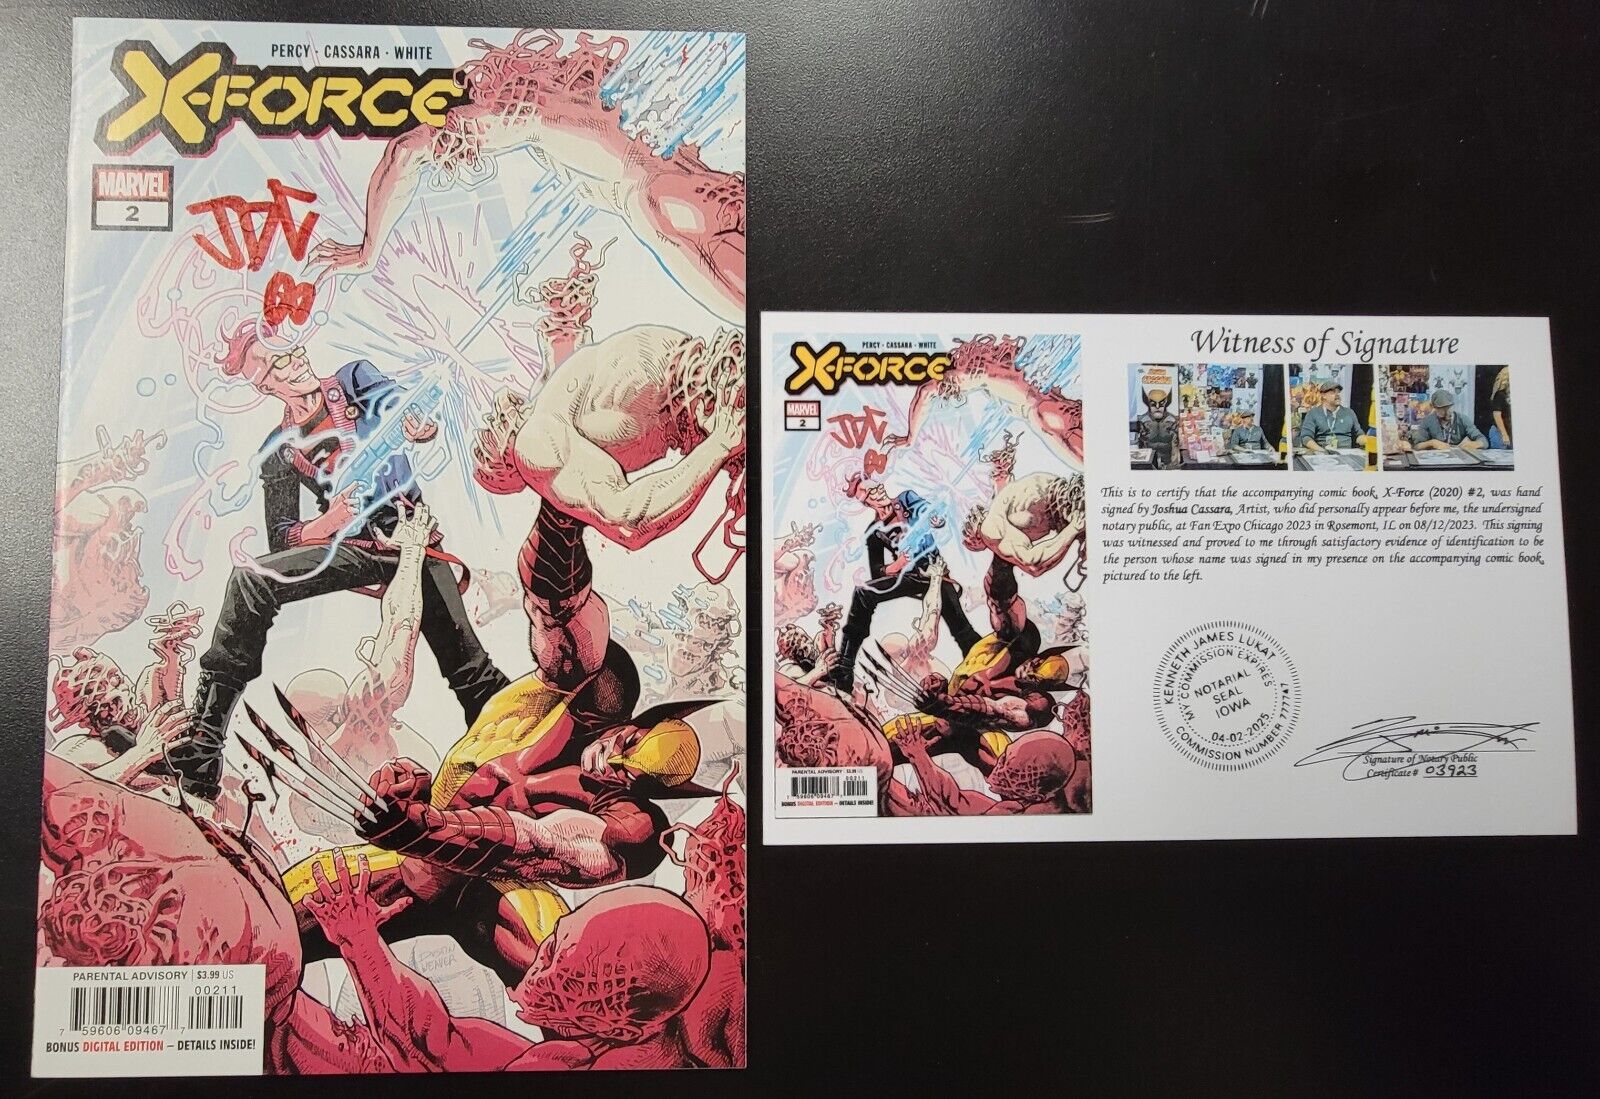 X-Force (2020) #2 SIGNED by Joshua Cassara with Notarized Witness of Signature